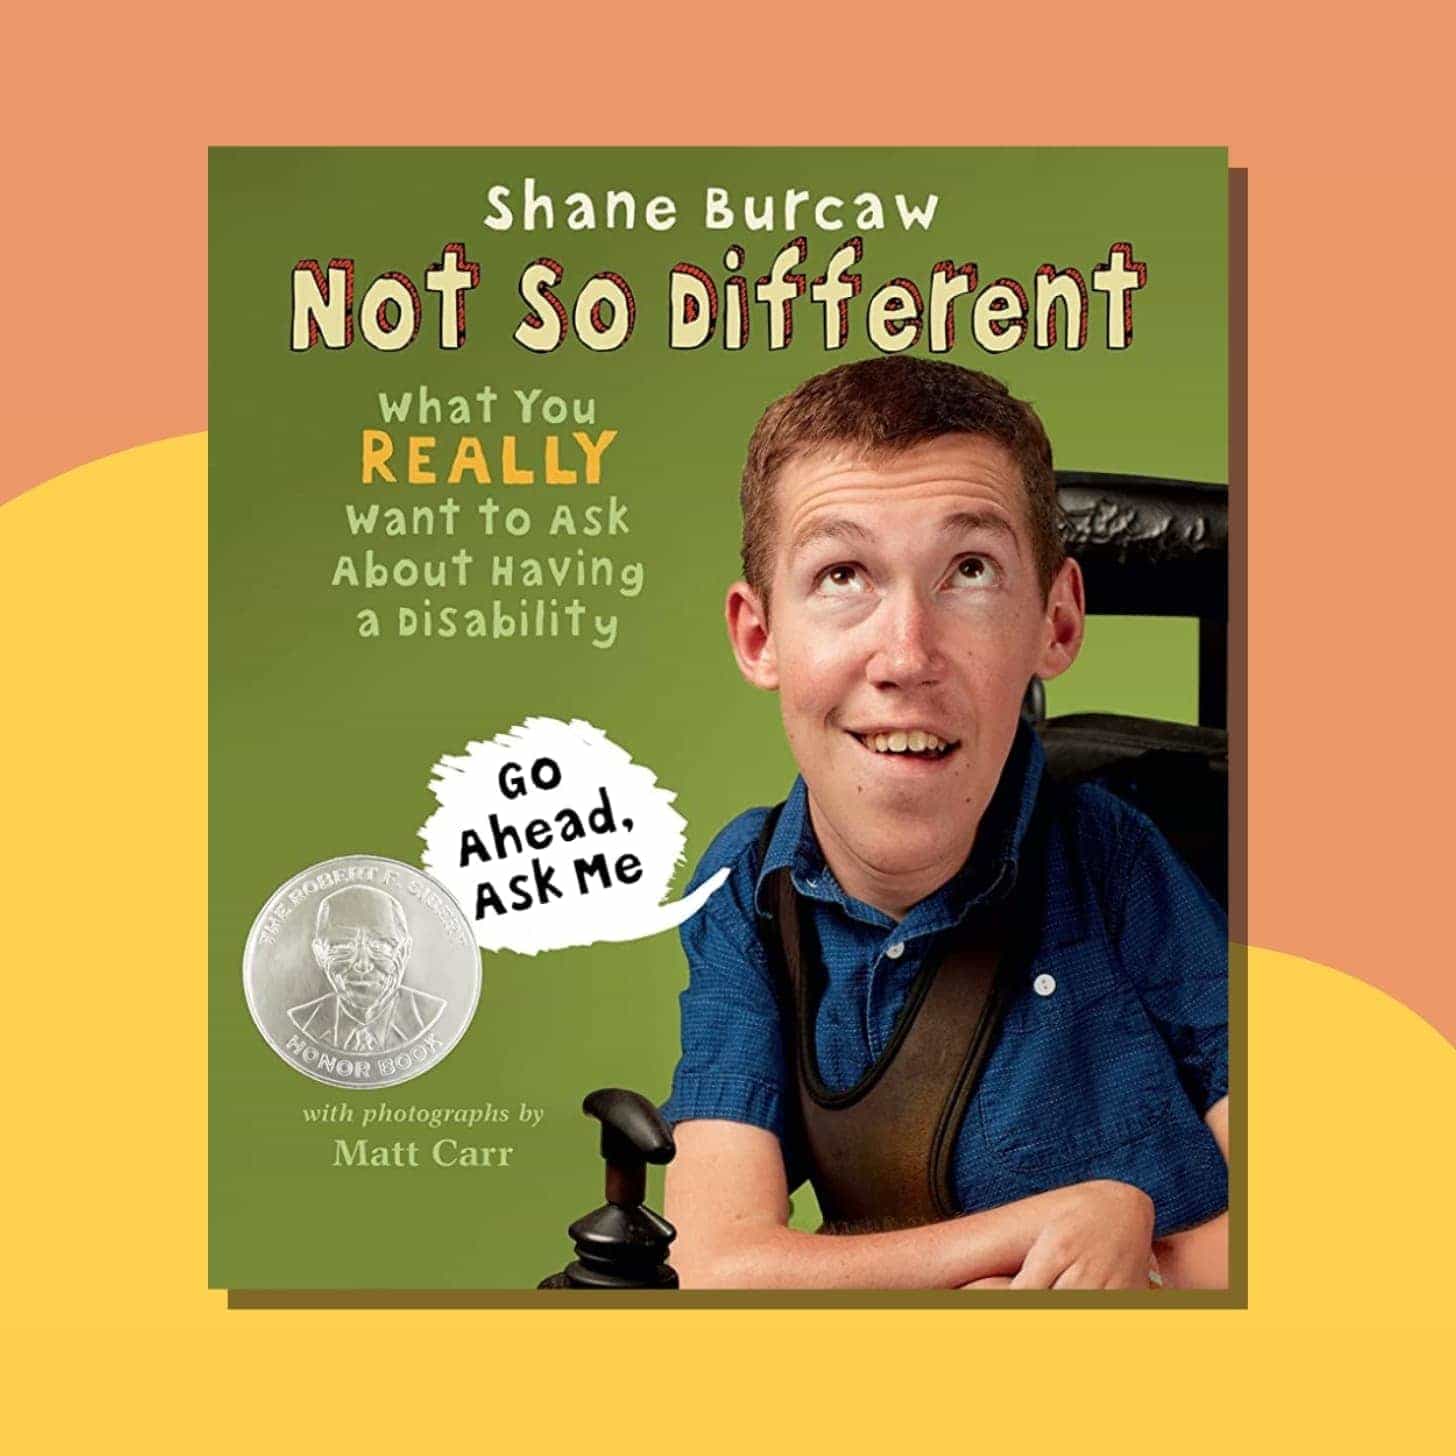 “Not So Different: What You Really Want to Ask About Having a Disability” by Shane Burcaw - Book cover has Shane smiling in his wheelchair